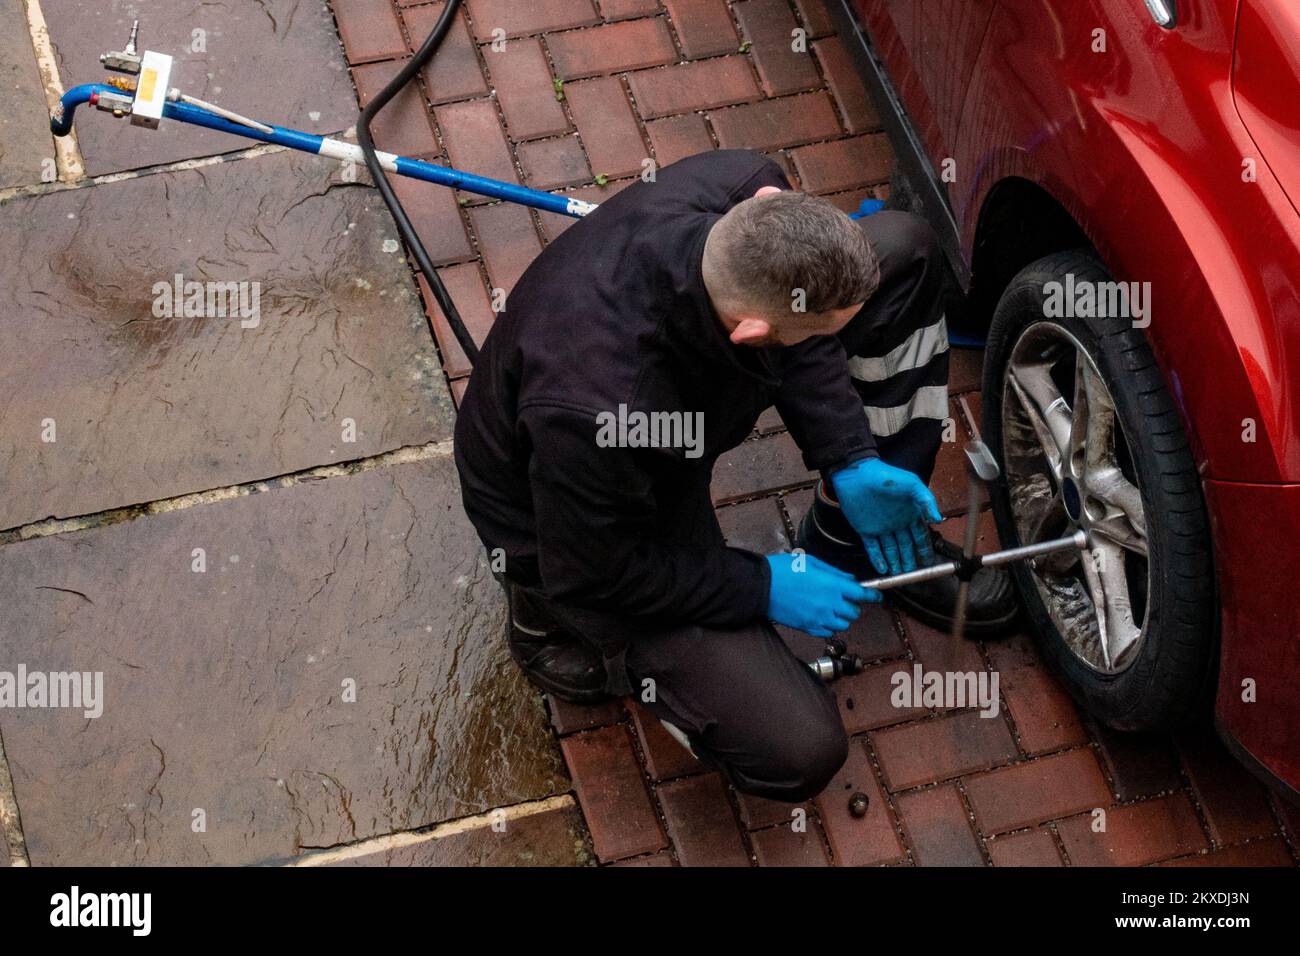 Mechanic changing car tyre, during repair of a puncture on domestic driveway, UK Stock Photo